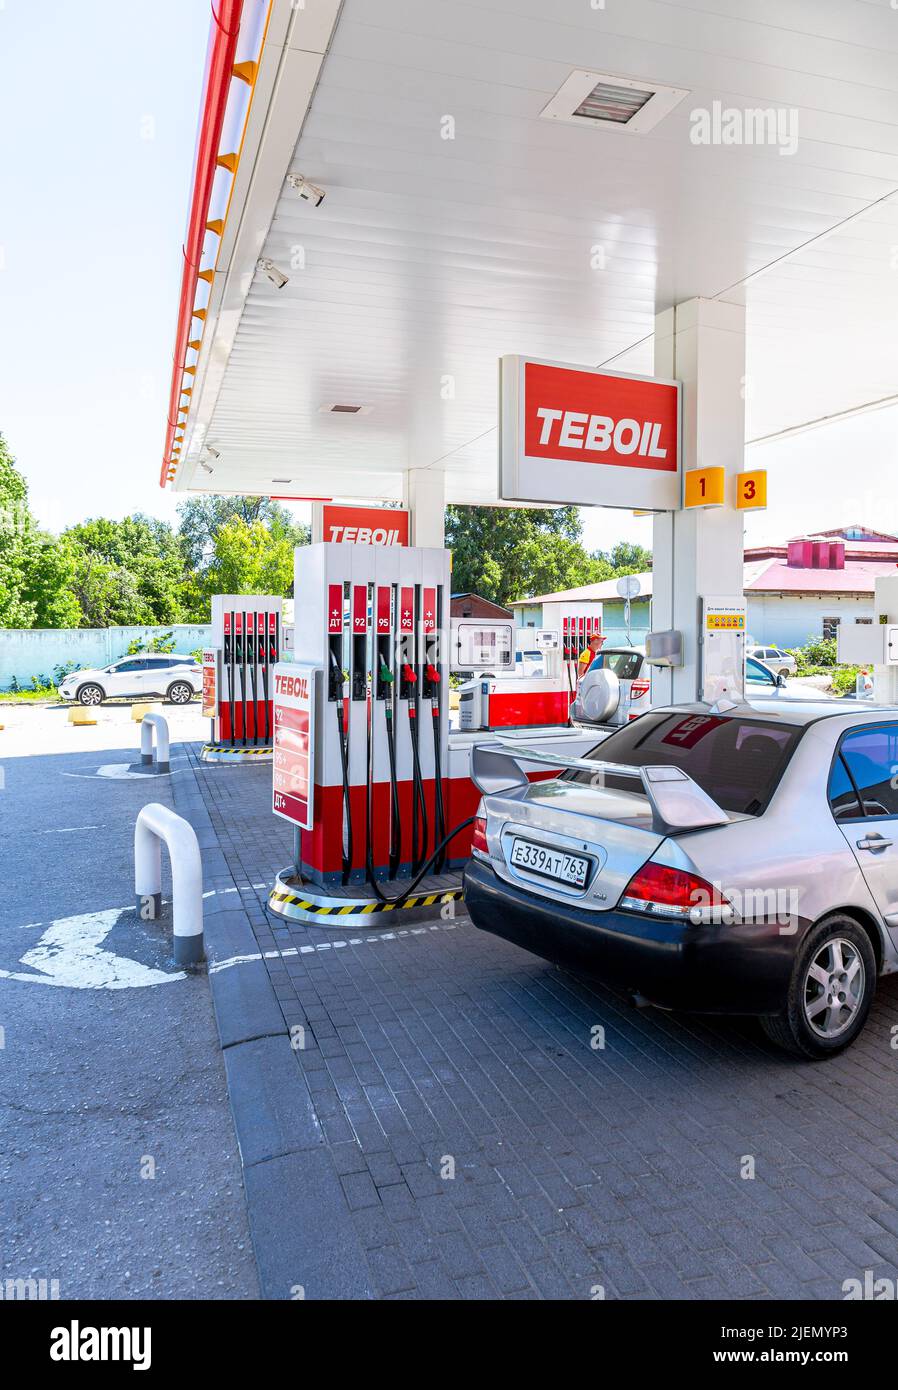 Samara, Russia - June 26, 2022: Teboil gas station in sunny day. Teboil is a subsidiary of the Russian company Lukoil Stock Photo